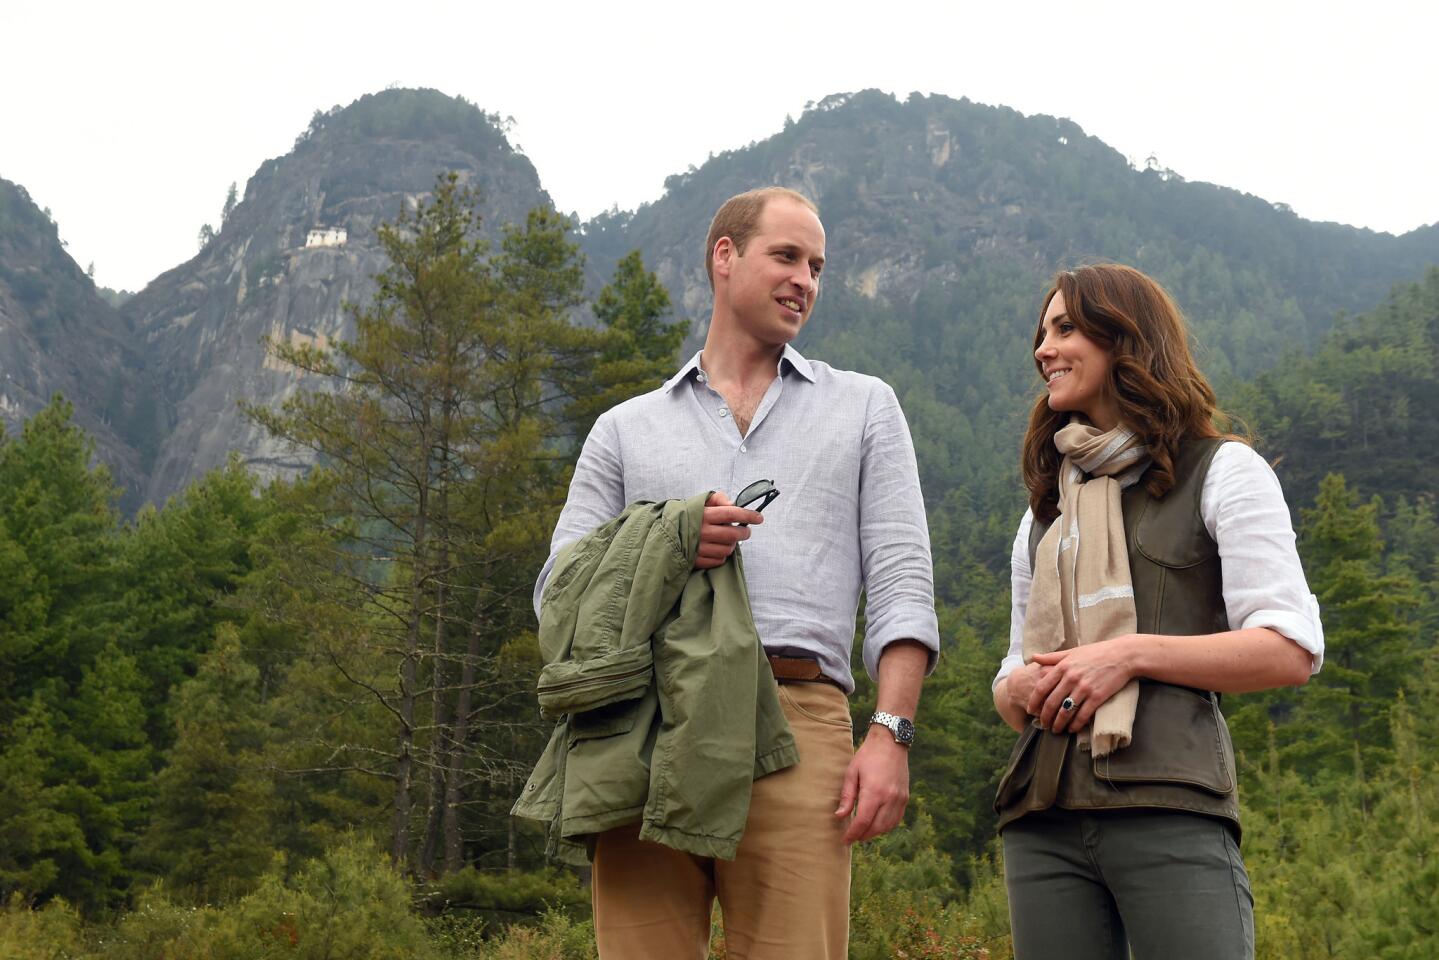 The Duke and Duchess of Cambridge after their trek to the Tiger's Nest Monastery during a visit to Bhutan on April 15, 2016.